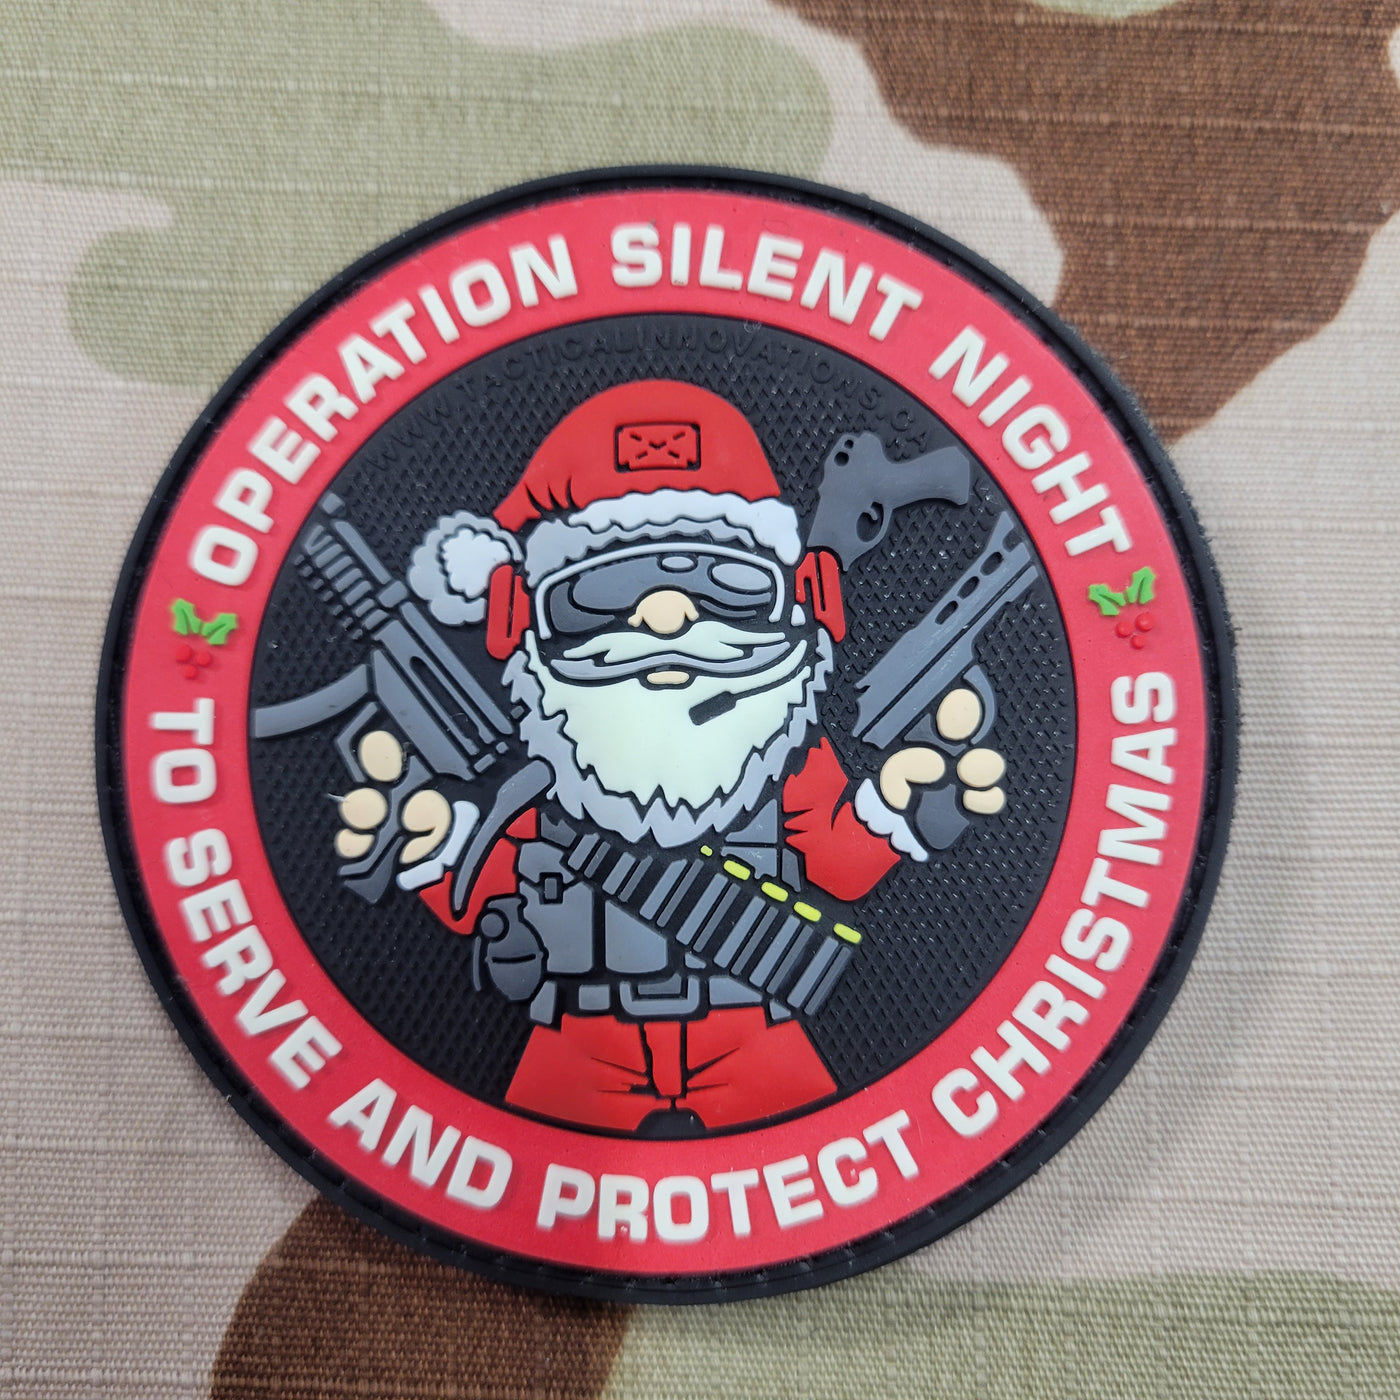 Operation Silent Night PVC Morale Patch